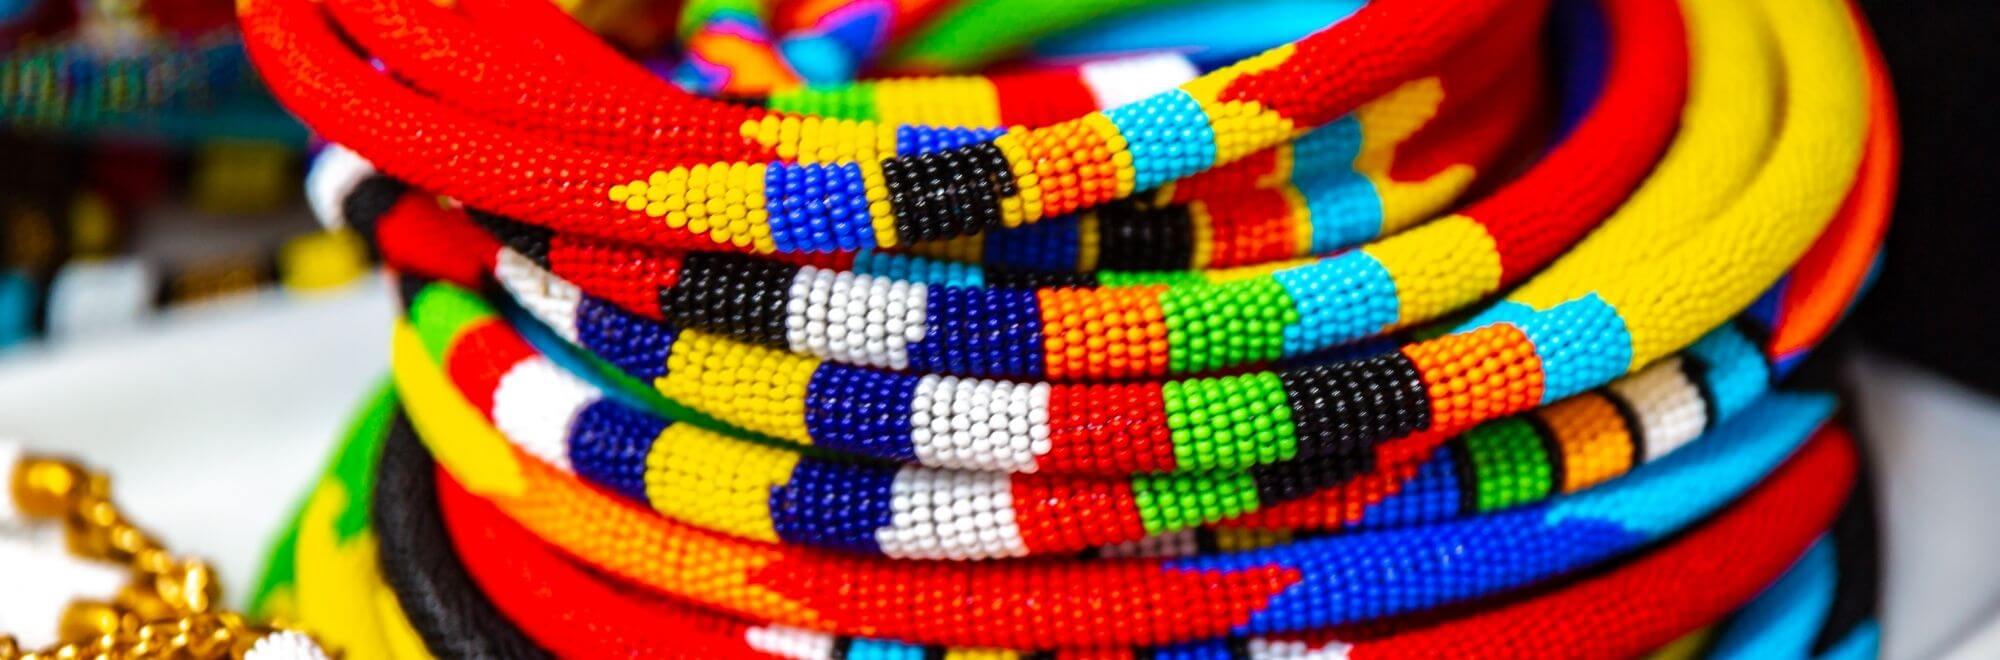 close-up of african beads